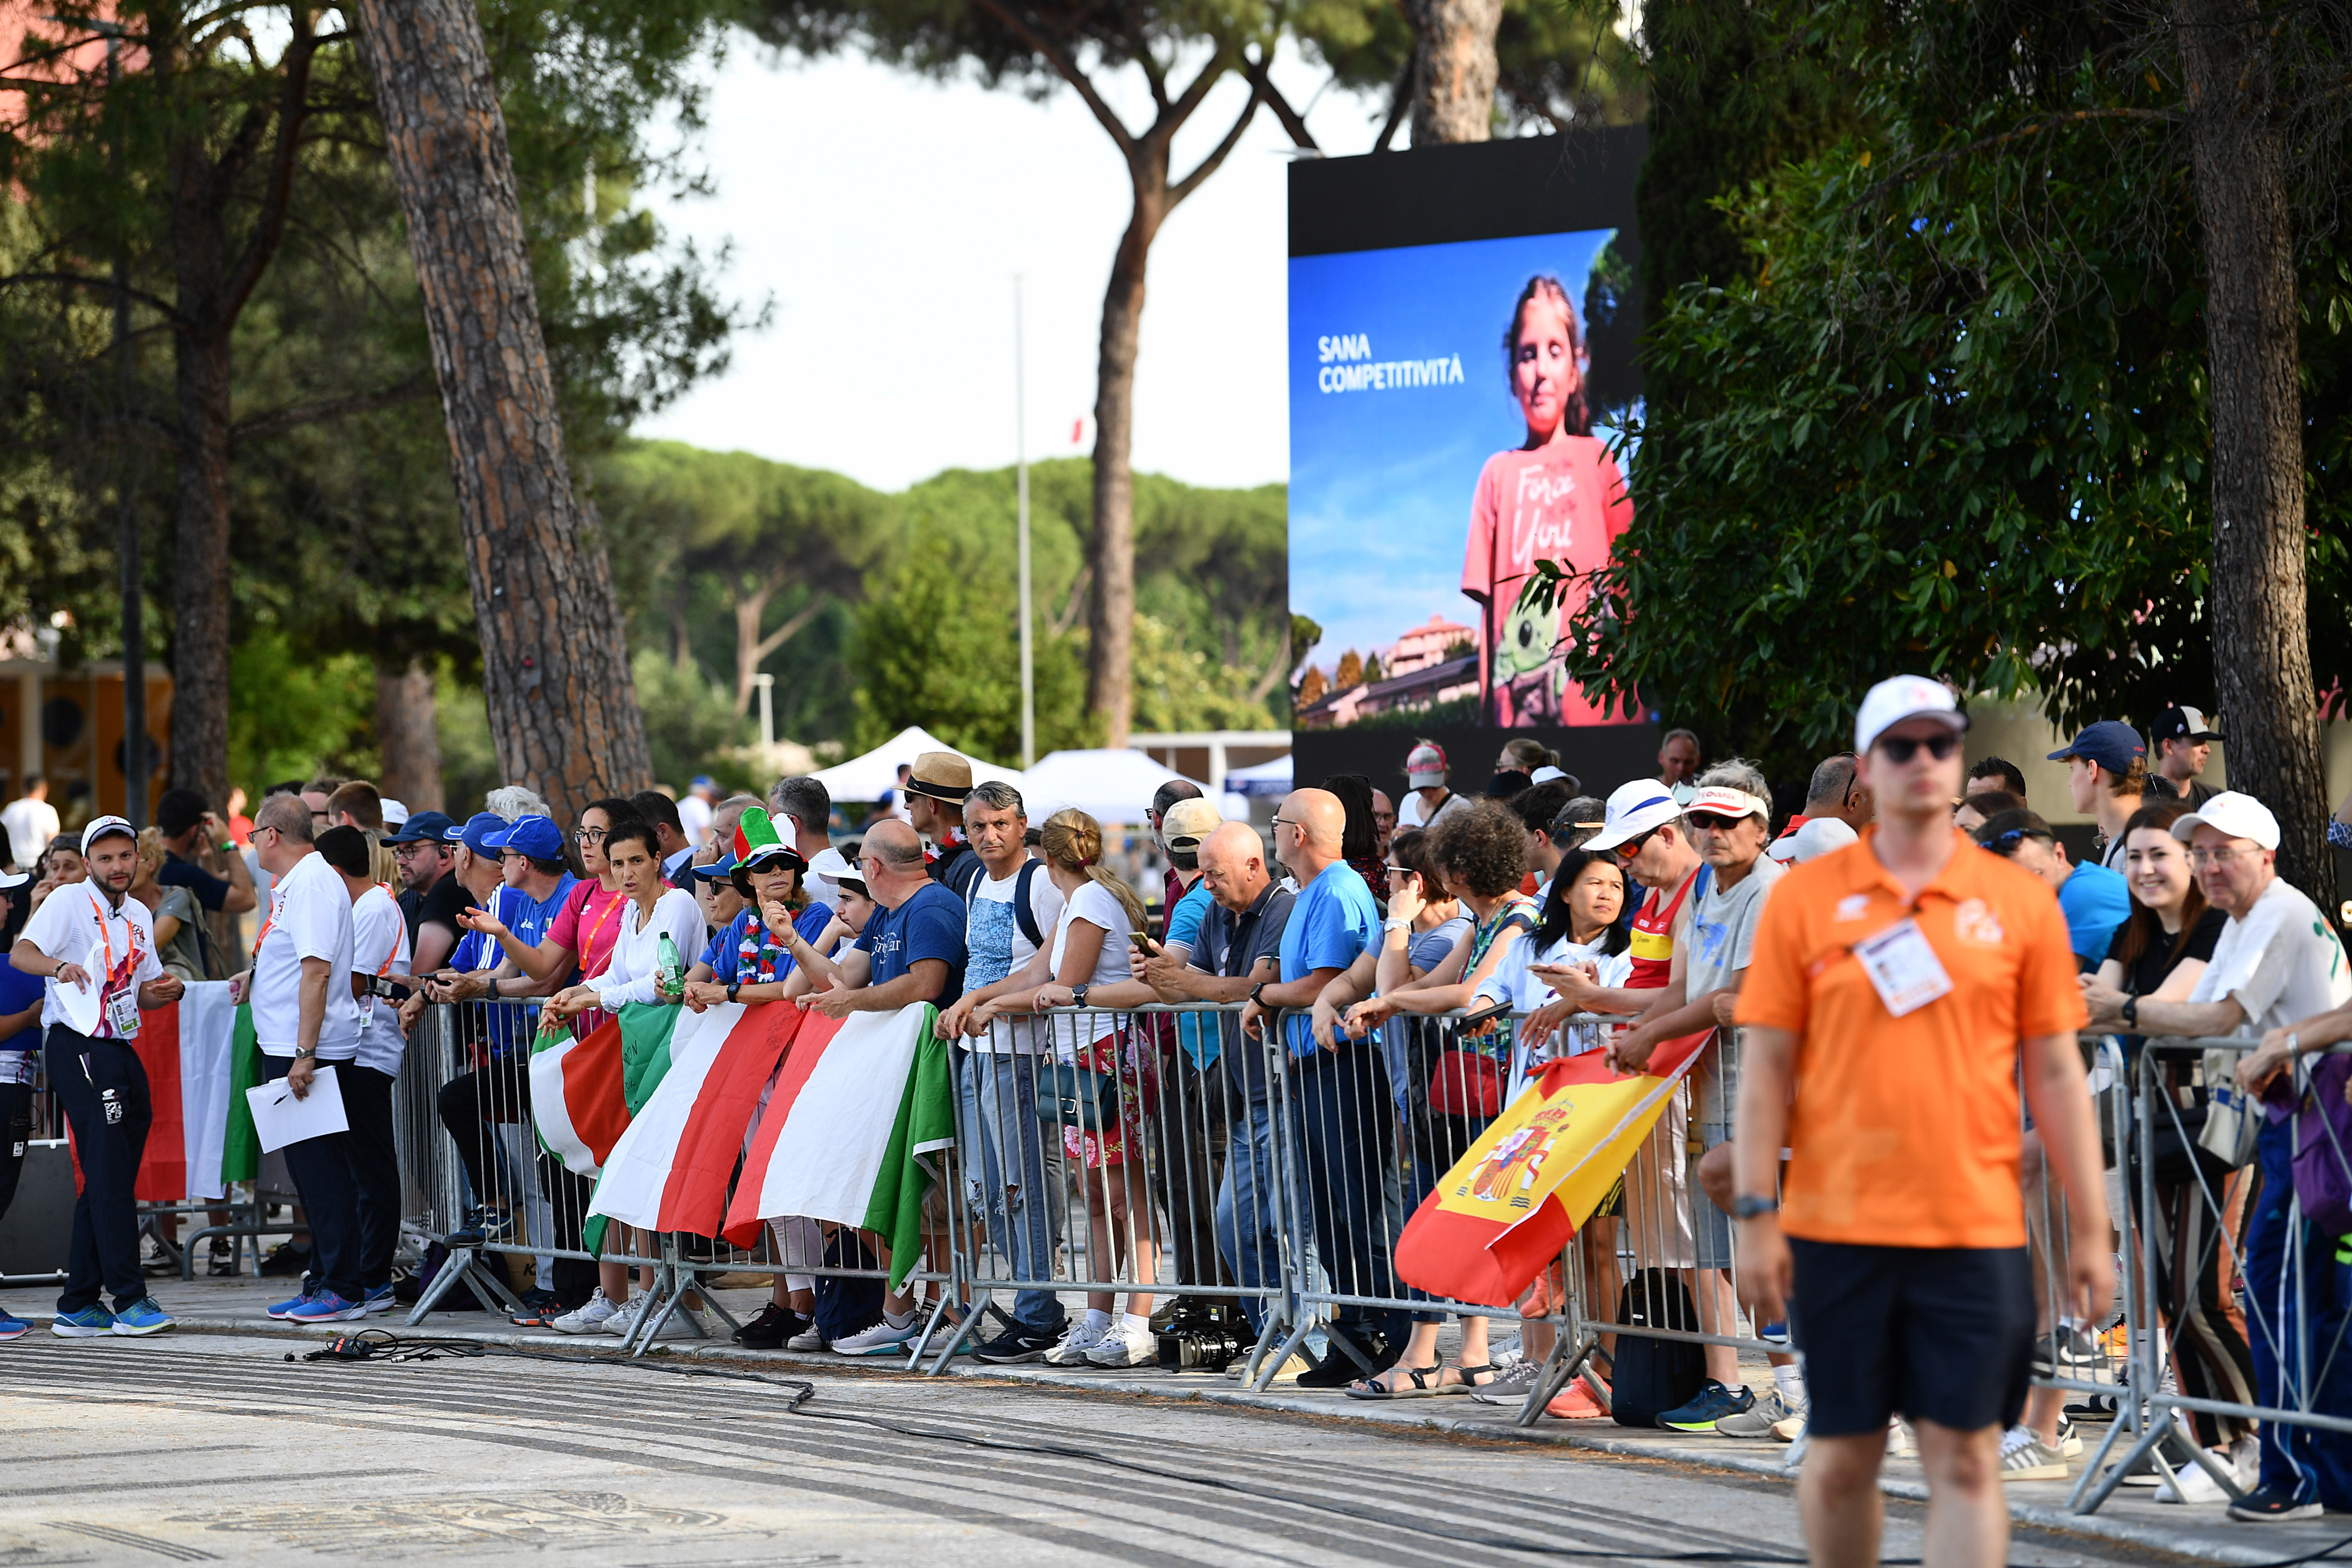 The Rome 2024 European Athletics Championships have formally begun